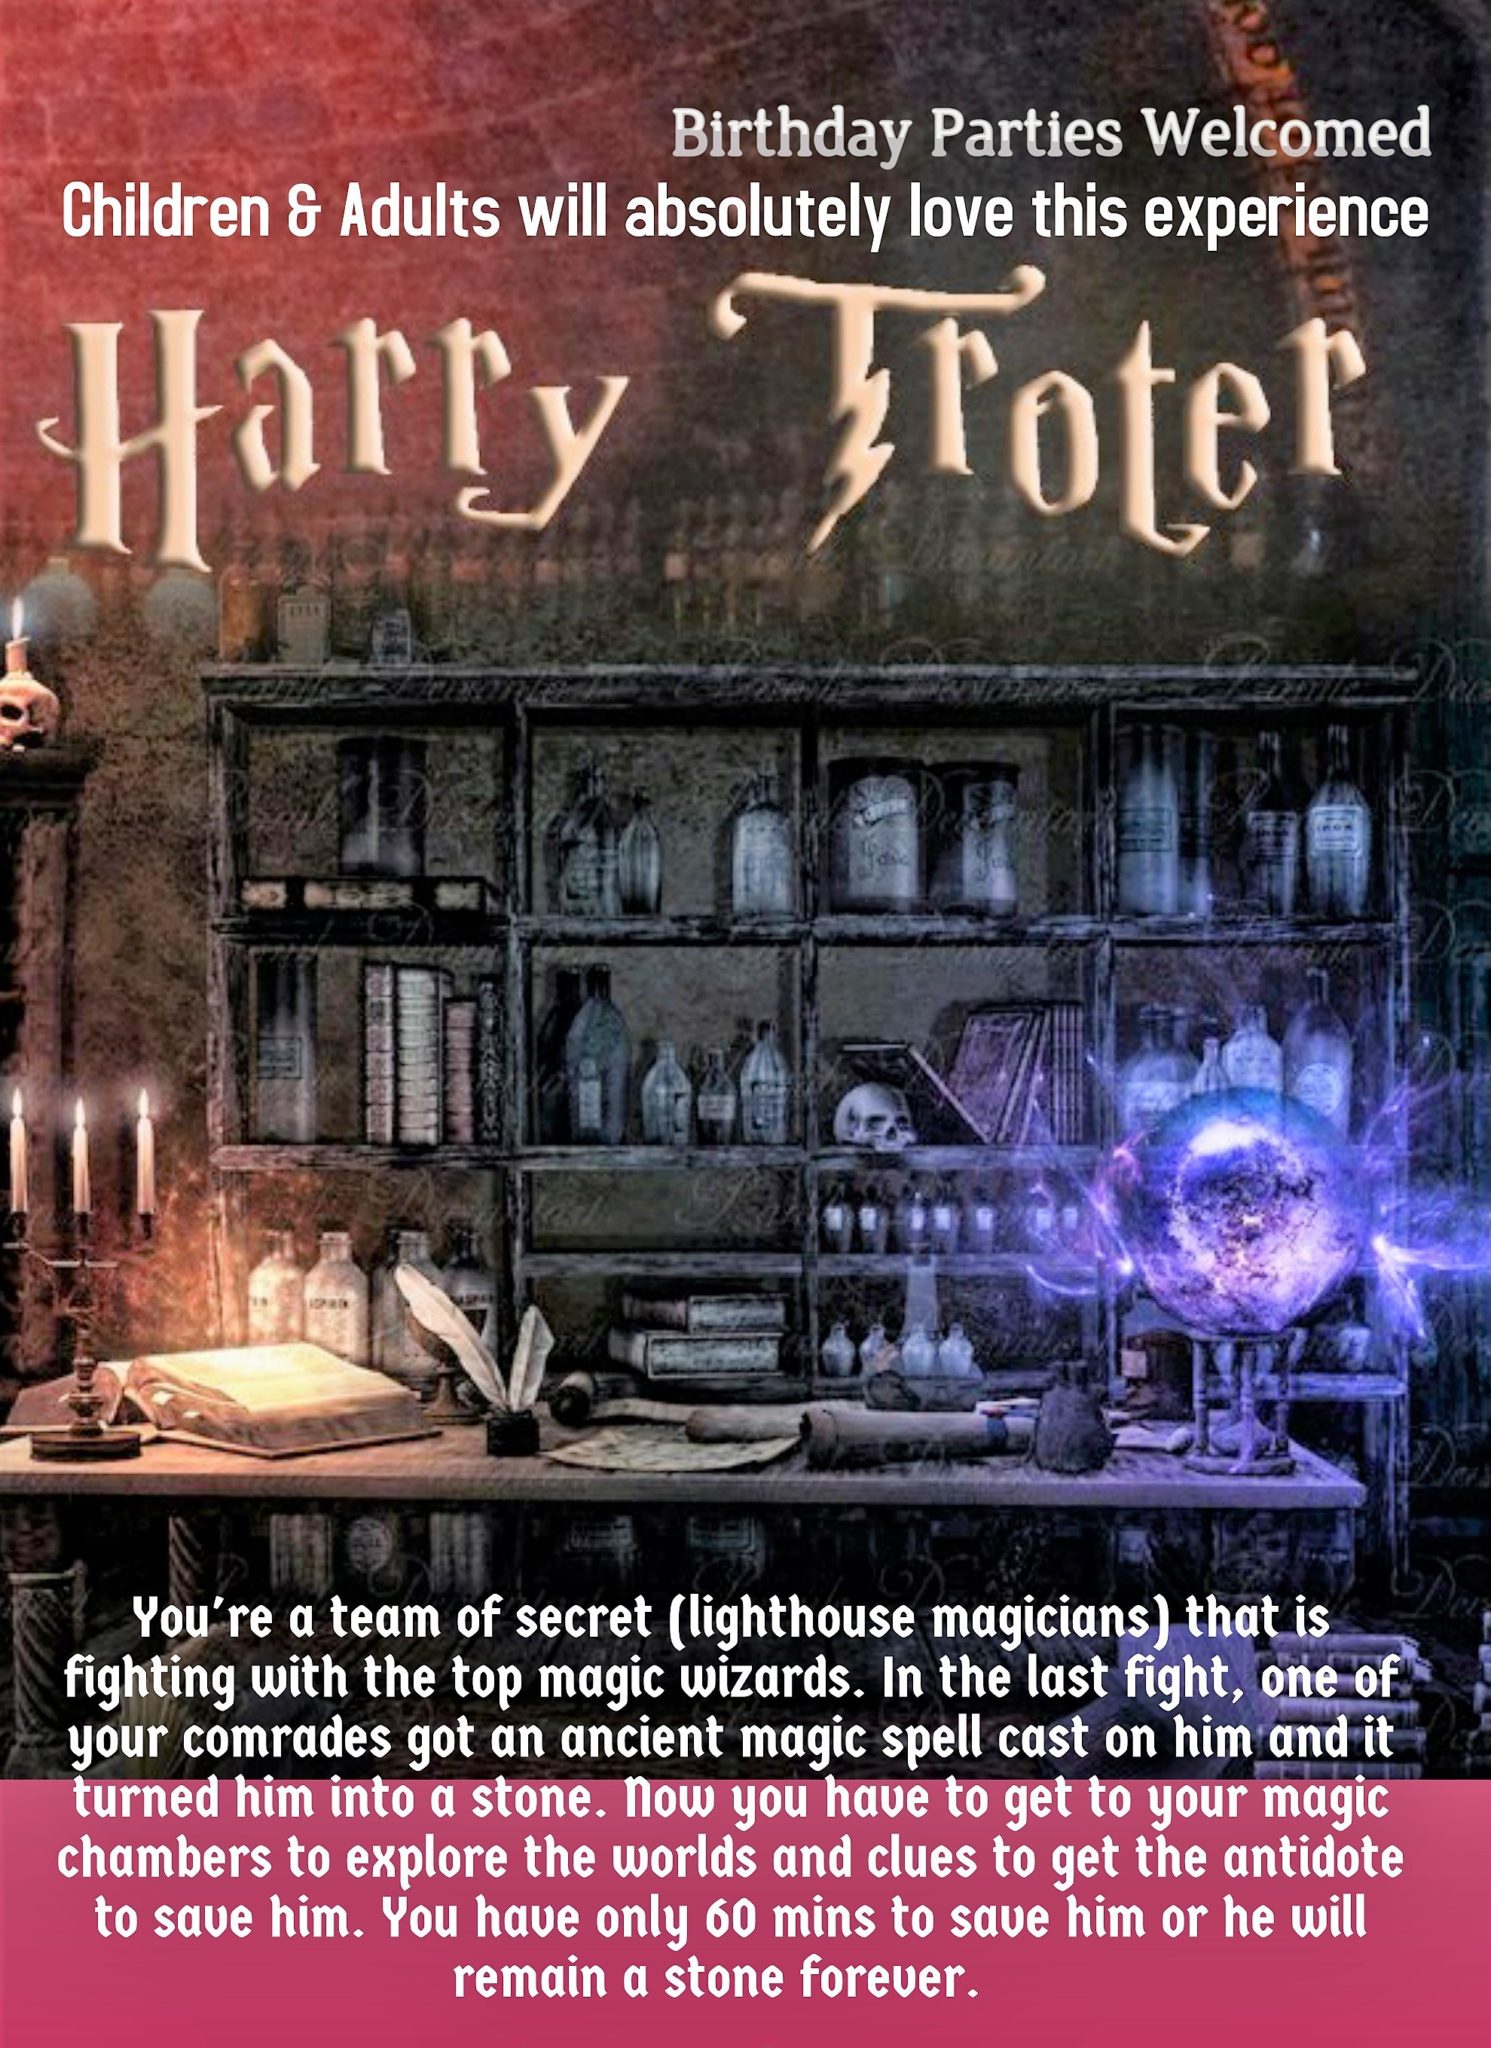 Harry Trotter (This room is not based off of any HP movies due to copyrights)